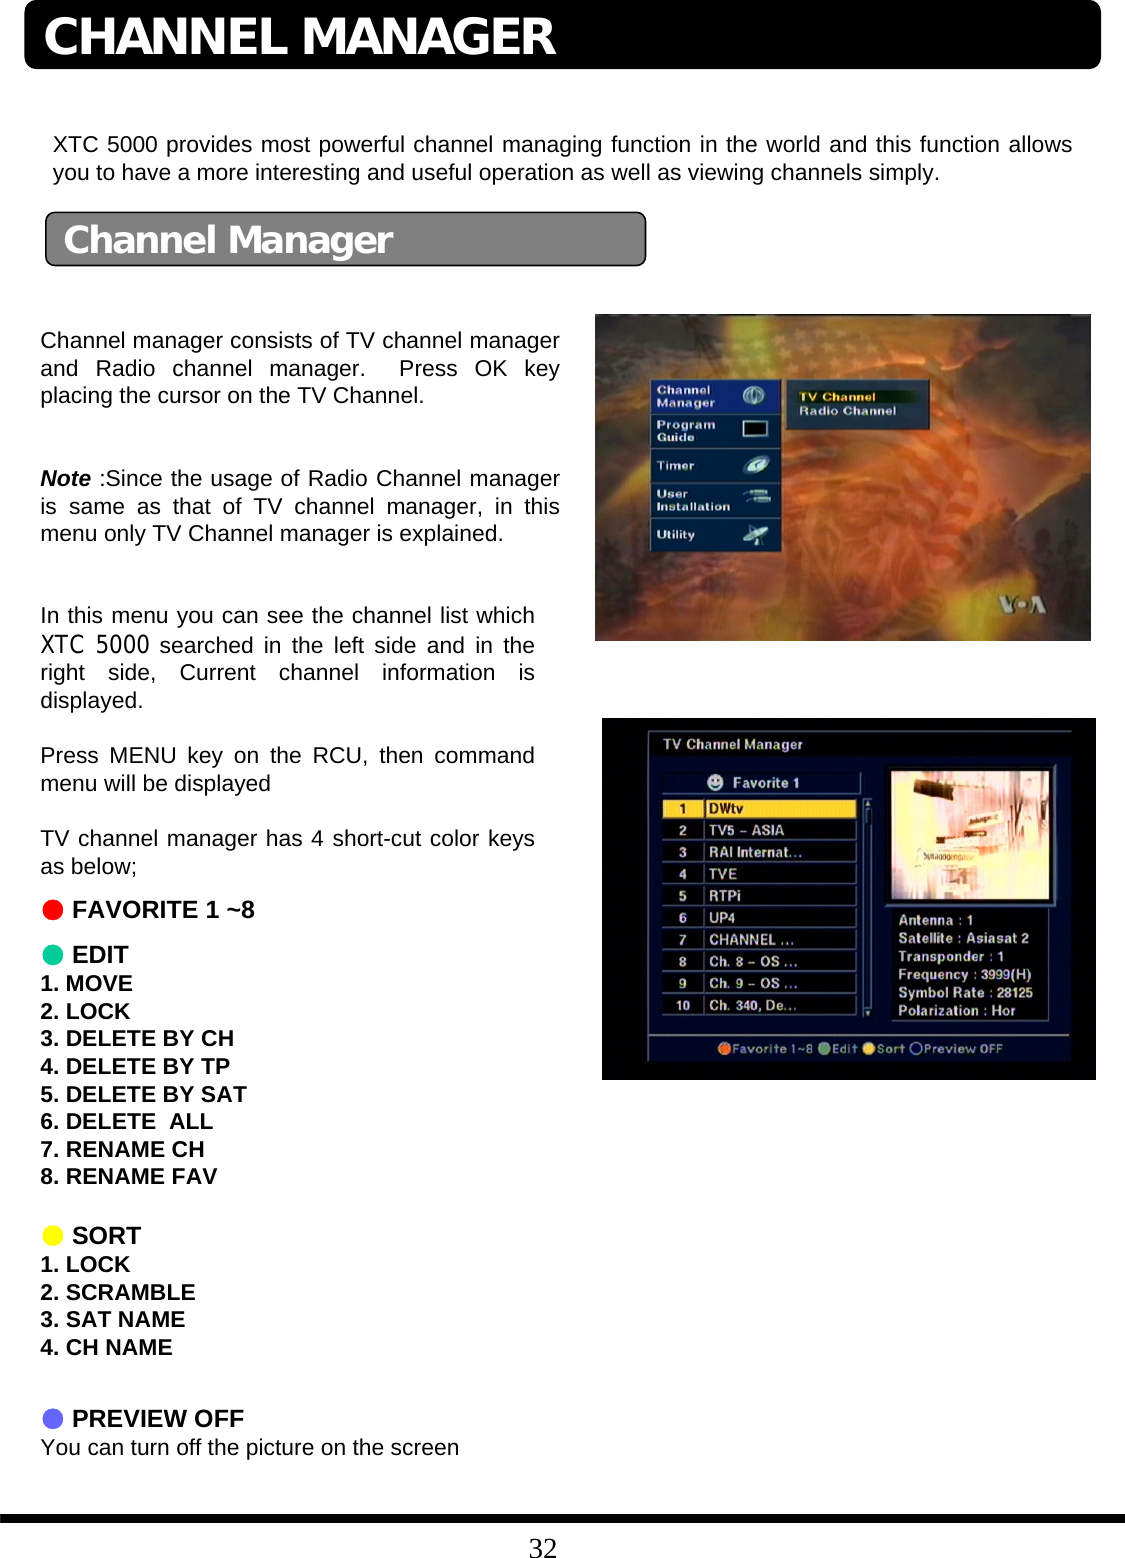 32Channel ManagerChannel manager consists of TV channel manager and Radio channel manager.  Press OK key placing the cursor on the TV Channel. Note :Since the usage of Radio Channel manager is same as that of TV channel manager, in this menu only TV Channel manager is explained. XTC 5000 provides most powerful channel managing function in the world and this function allows you to have a more interesting and useful operation as well as viewing channels simply. In this menu you can see the channel list which XTC 5000 searched in the left side and in the right side, Current channel information is displayed. Press MENU key on the RCU, then command menu will be displayedTV channel manager has 4 short-cut color keys as below;●FAVORITE 1 ~8         ●EDIT1. MOVE2. LOCK3. DELETE BY CH4. DELETE BY TP5. DELETE BY SAT6. DELETE  ALL7. RENAME CH8. RENAME FAV●SORT1. LOCK2. SCRAMBLE3. SAT NAME4. CH NAME●PREVIEW OFFYou can turn off the picture on the screen CHANNEL MANAGER